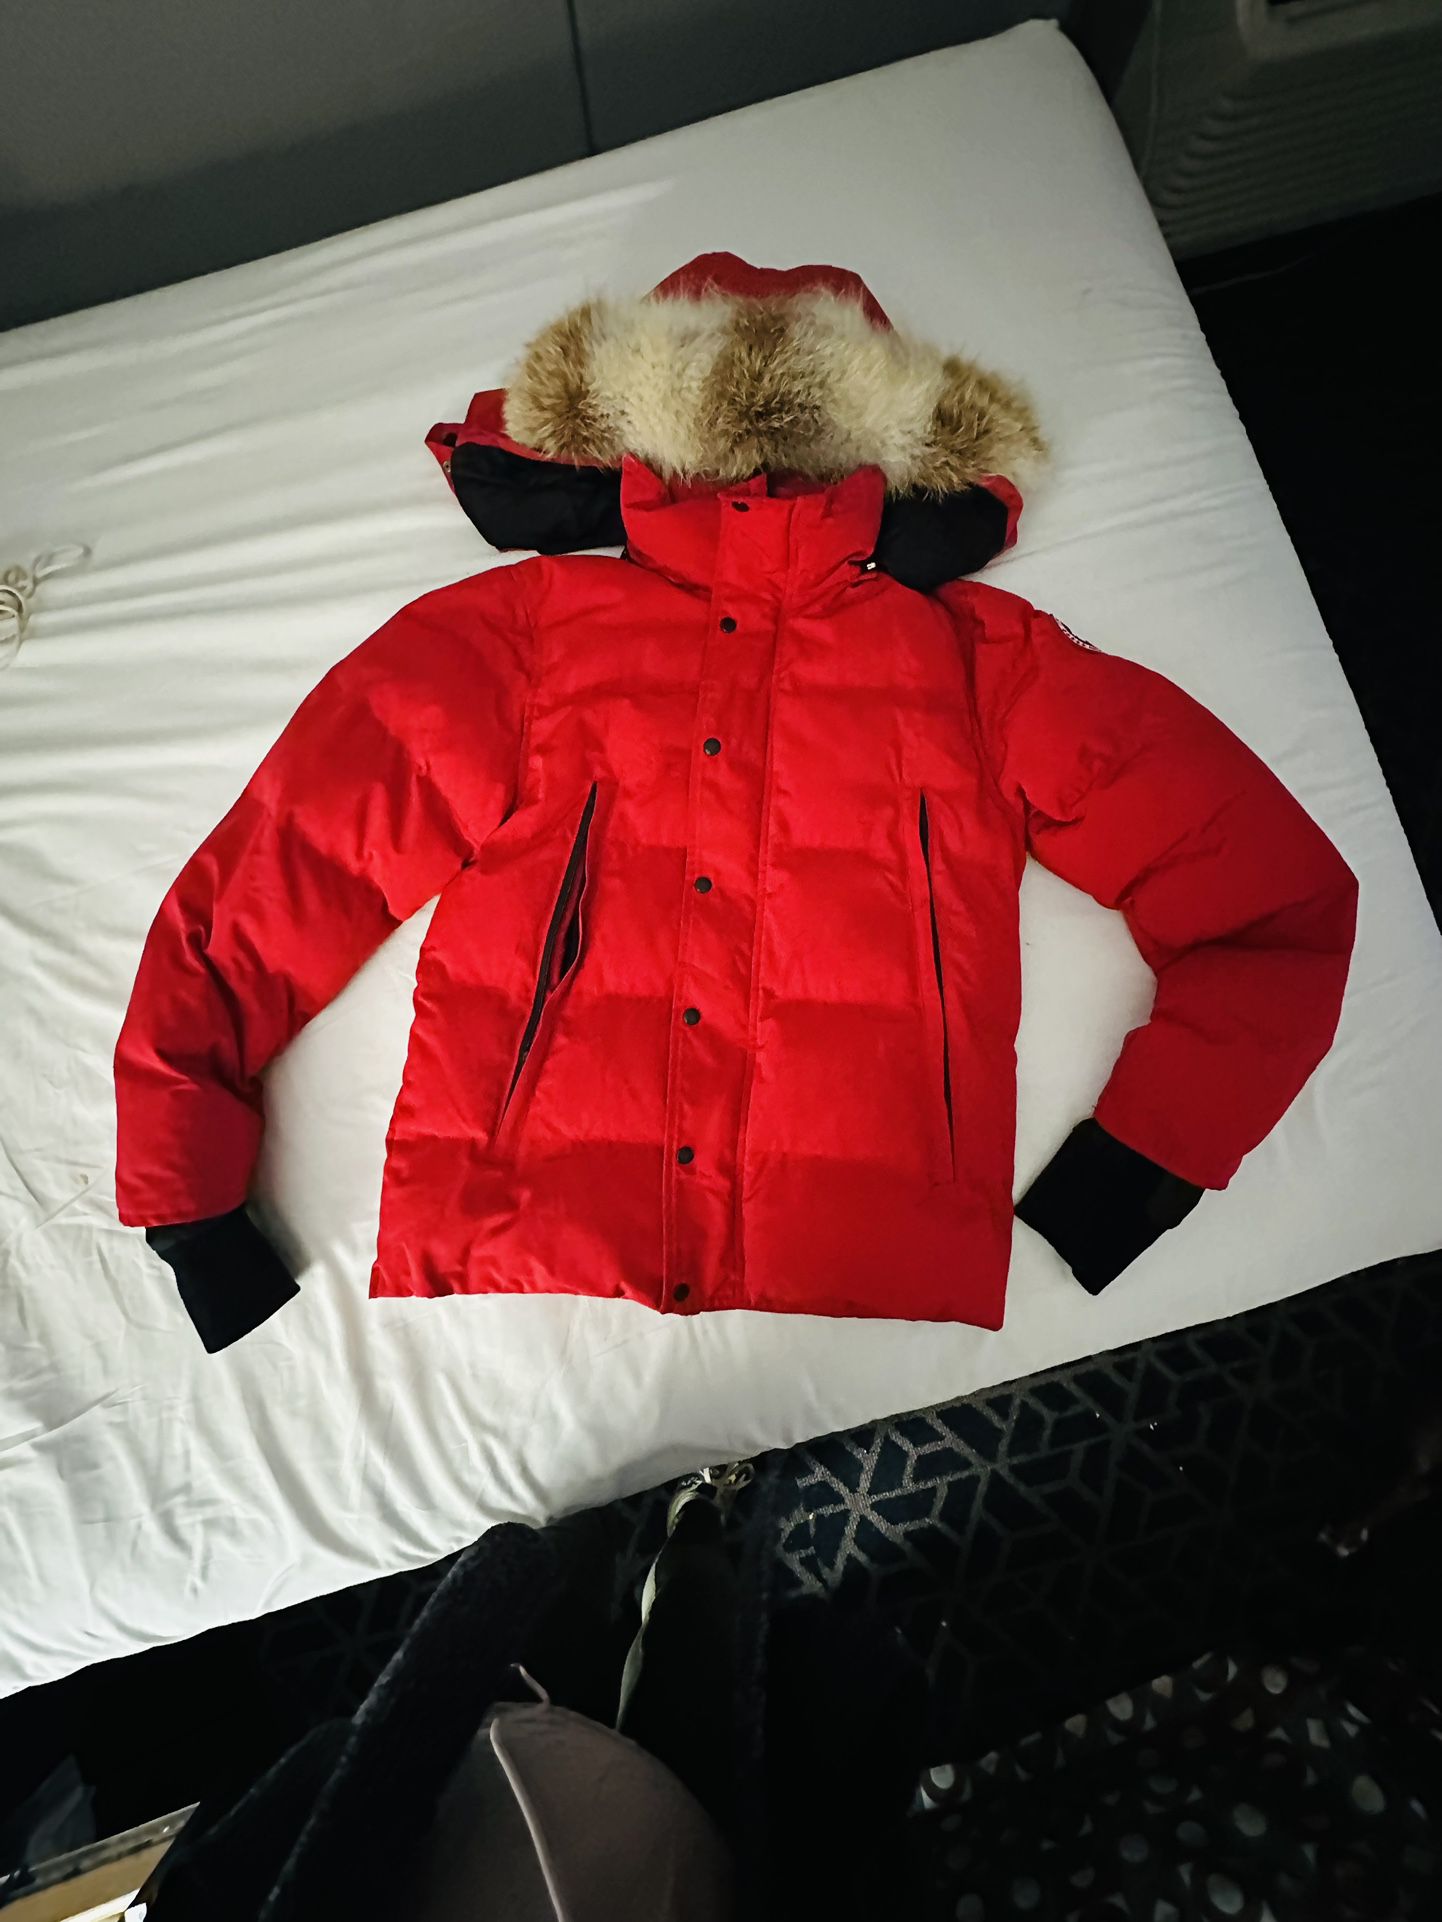 Brand New CANADA GOOSE MENS EXPEDITION LOGO HOODED DOWN JACKET WITH FUR HOOD - XL- NEVER BEEN WORN!